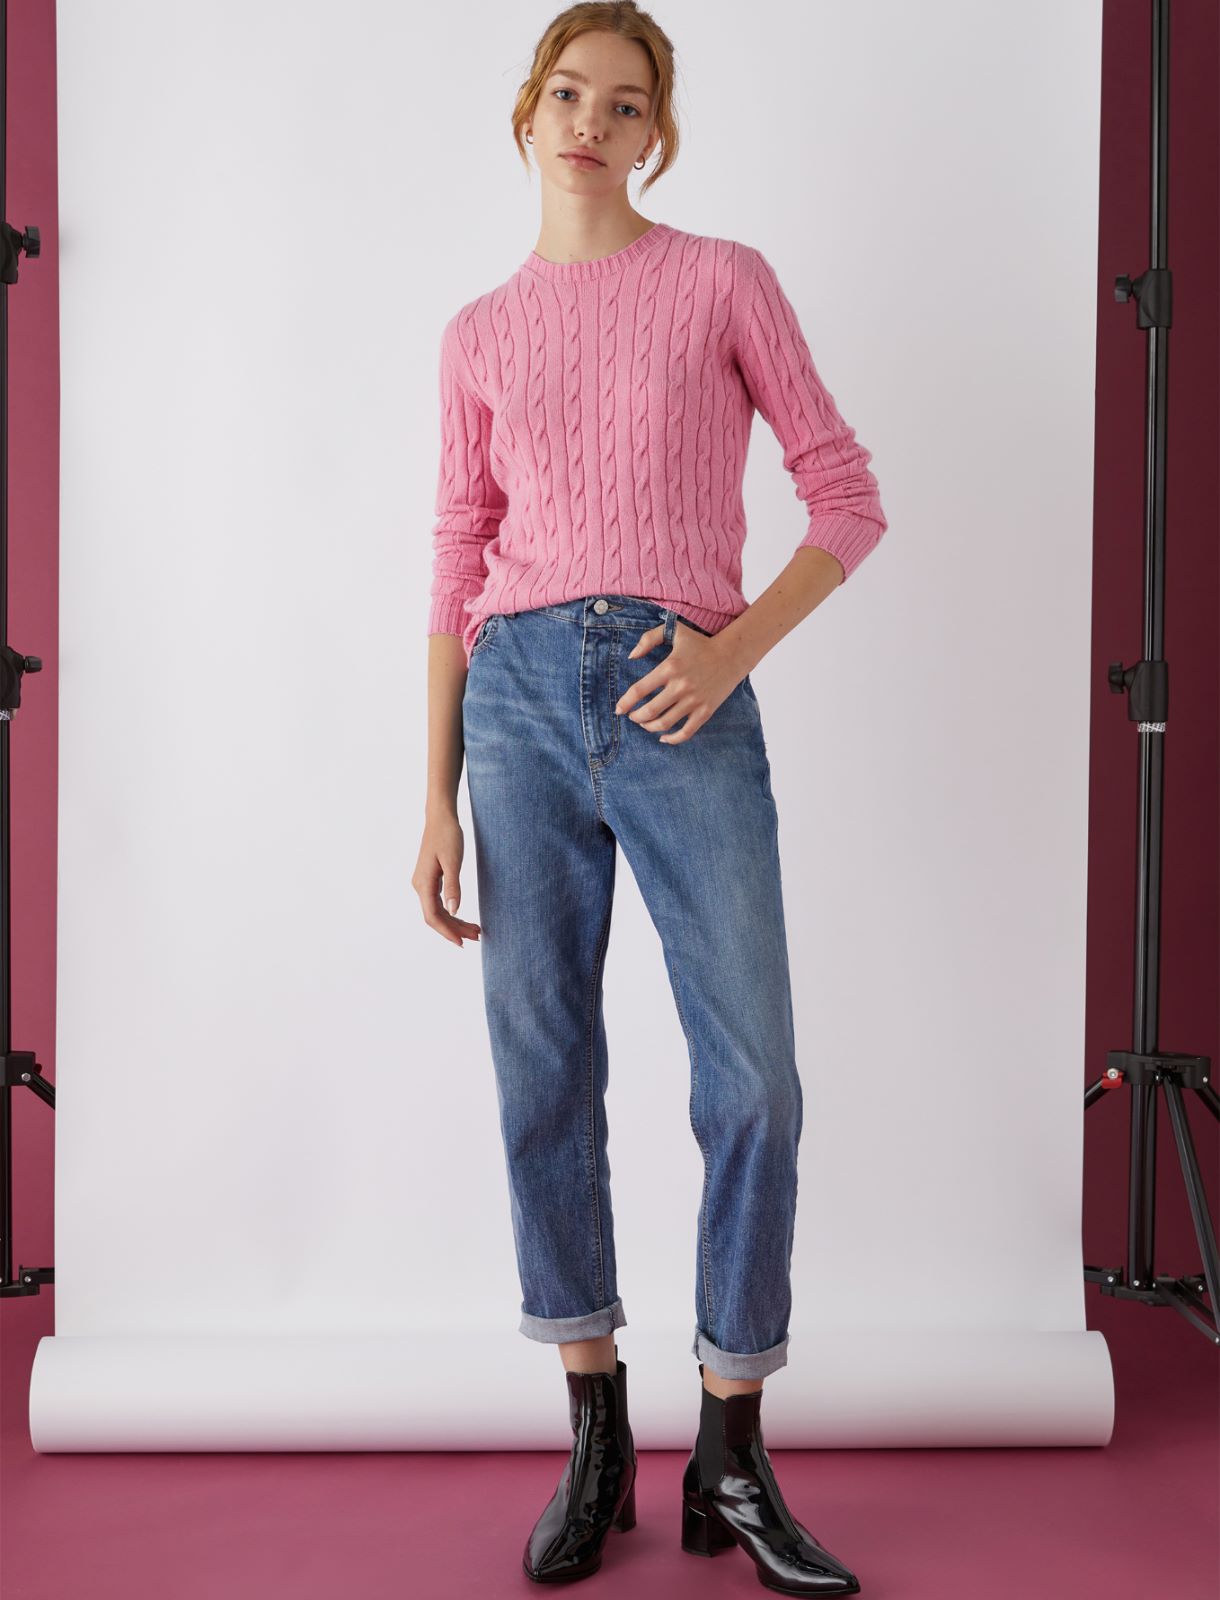 Cable-knit sweater - Shocking pink - Marella